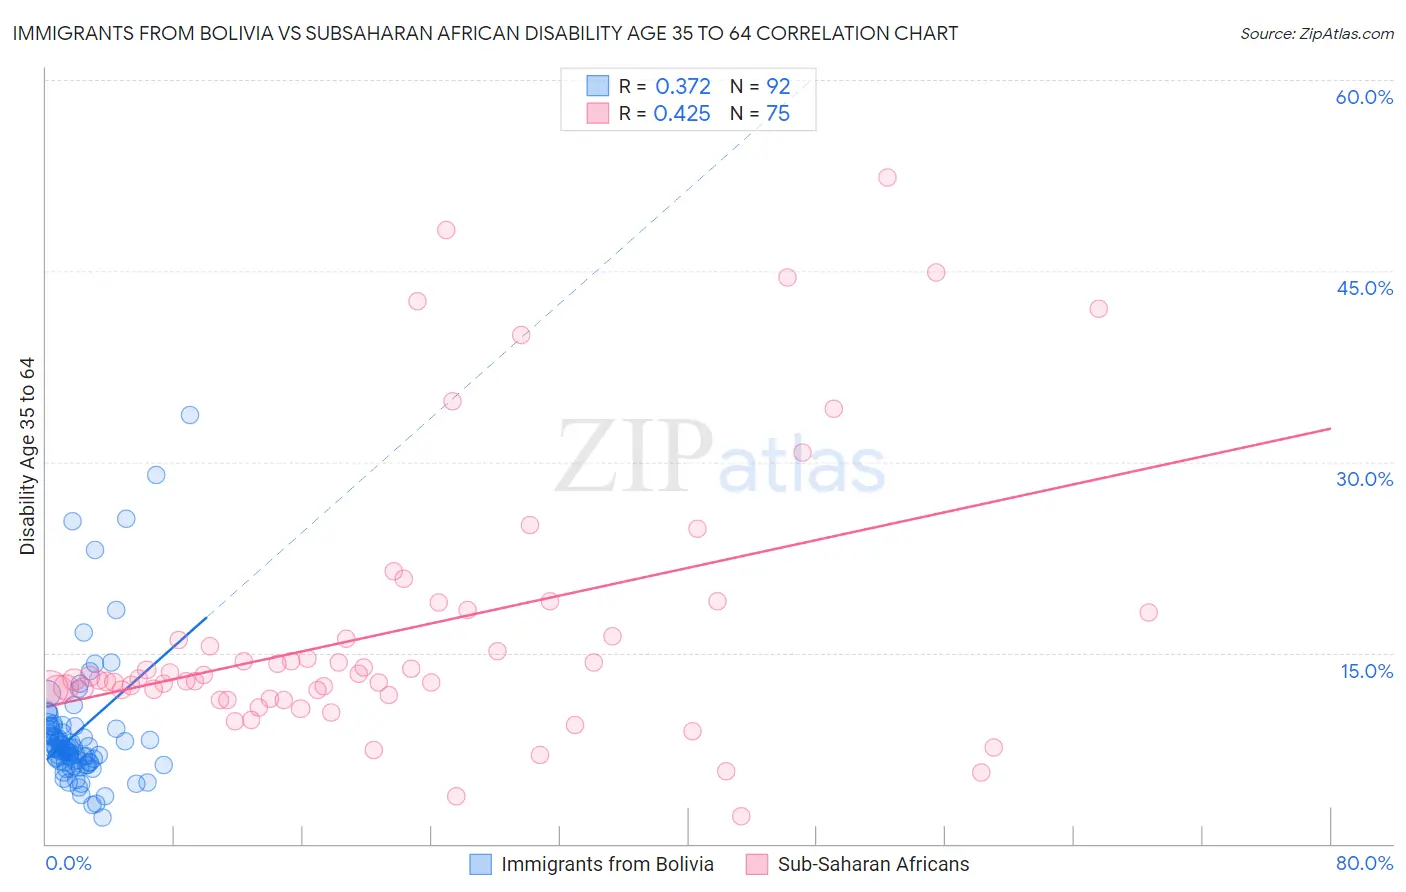 Immigrants from Bolivia vs Subsaharan African Disability Age 35 to 64